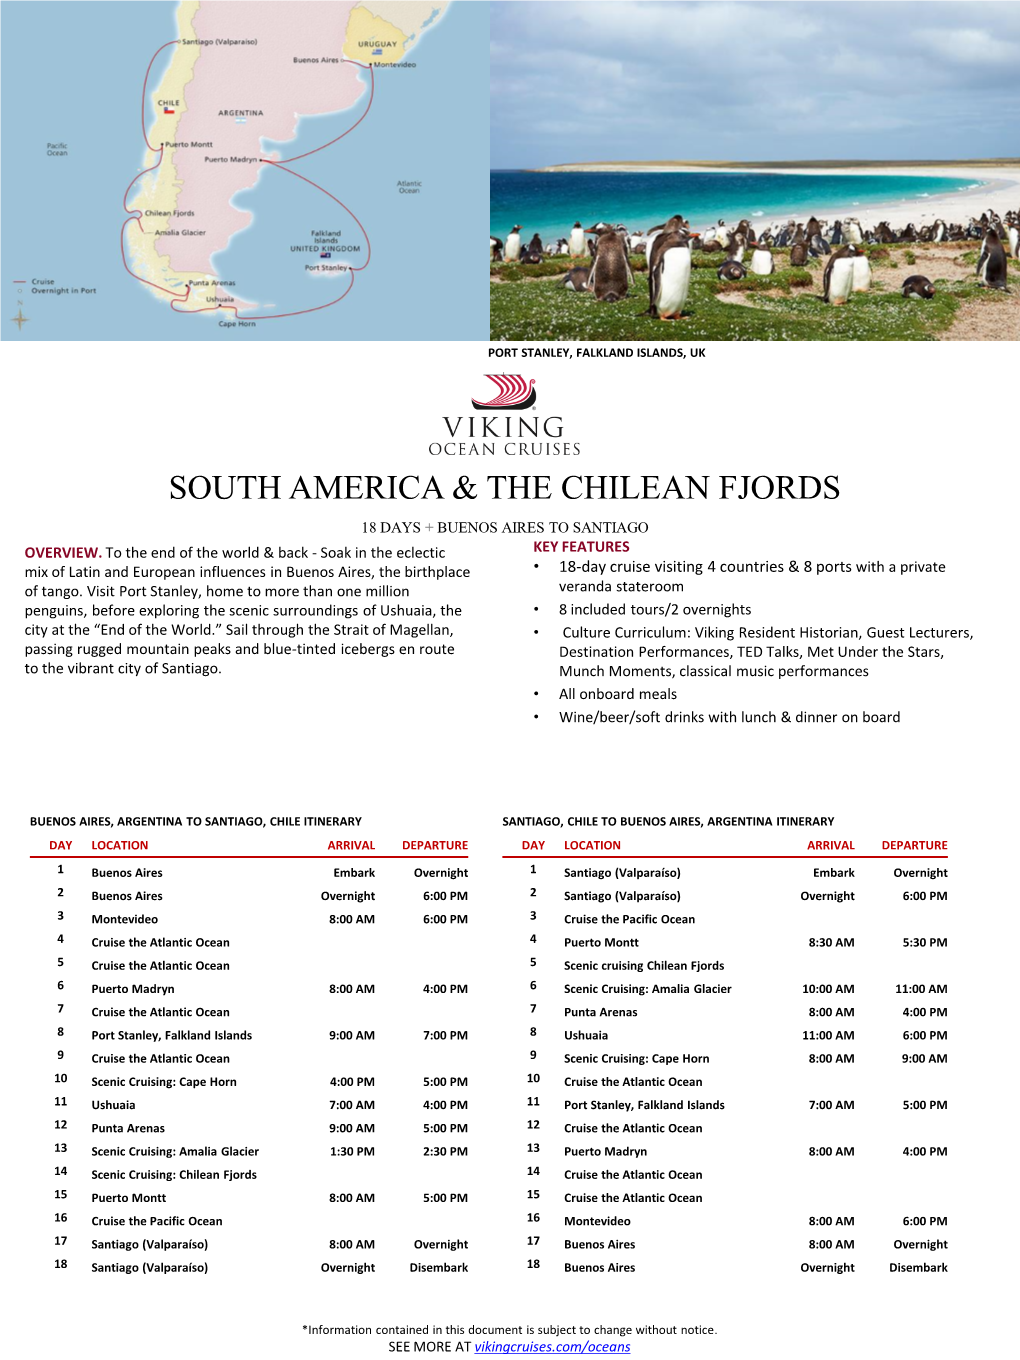 South America & the Chilean Fjords